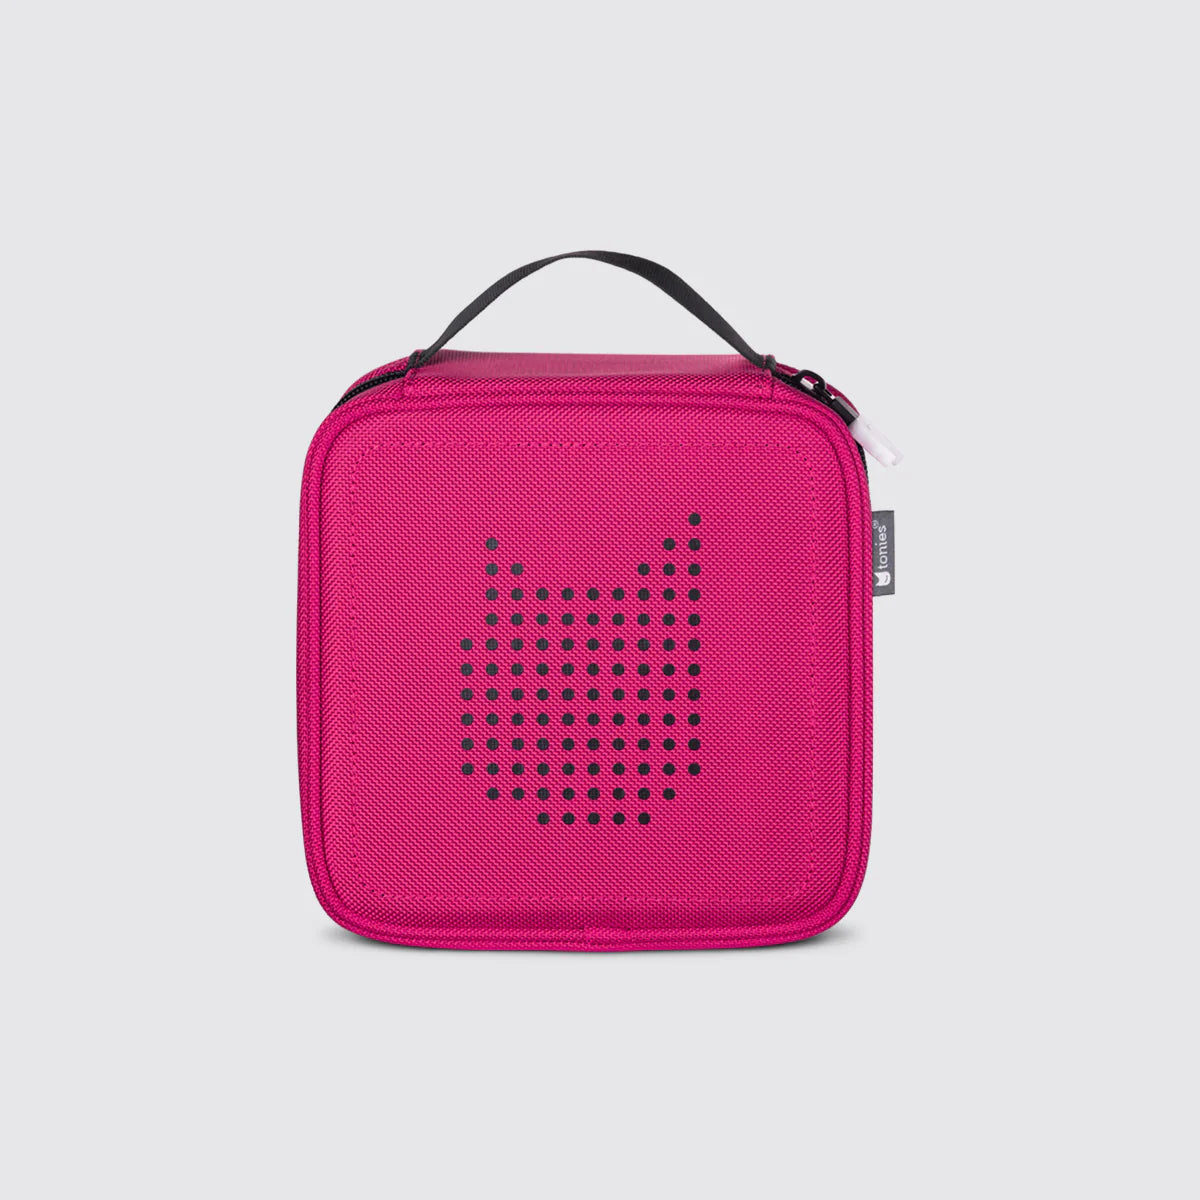 Tonie Carrying Case- Pink by Tonies #10001205